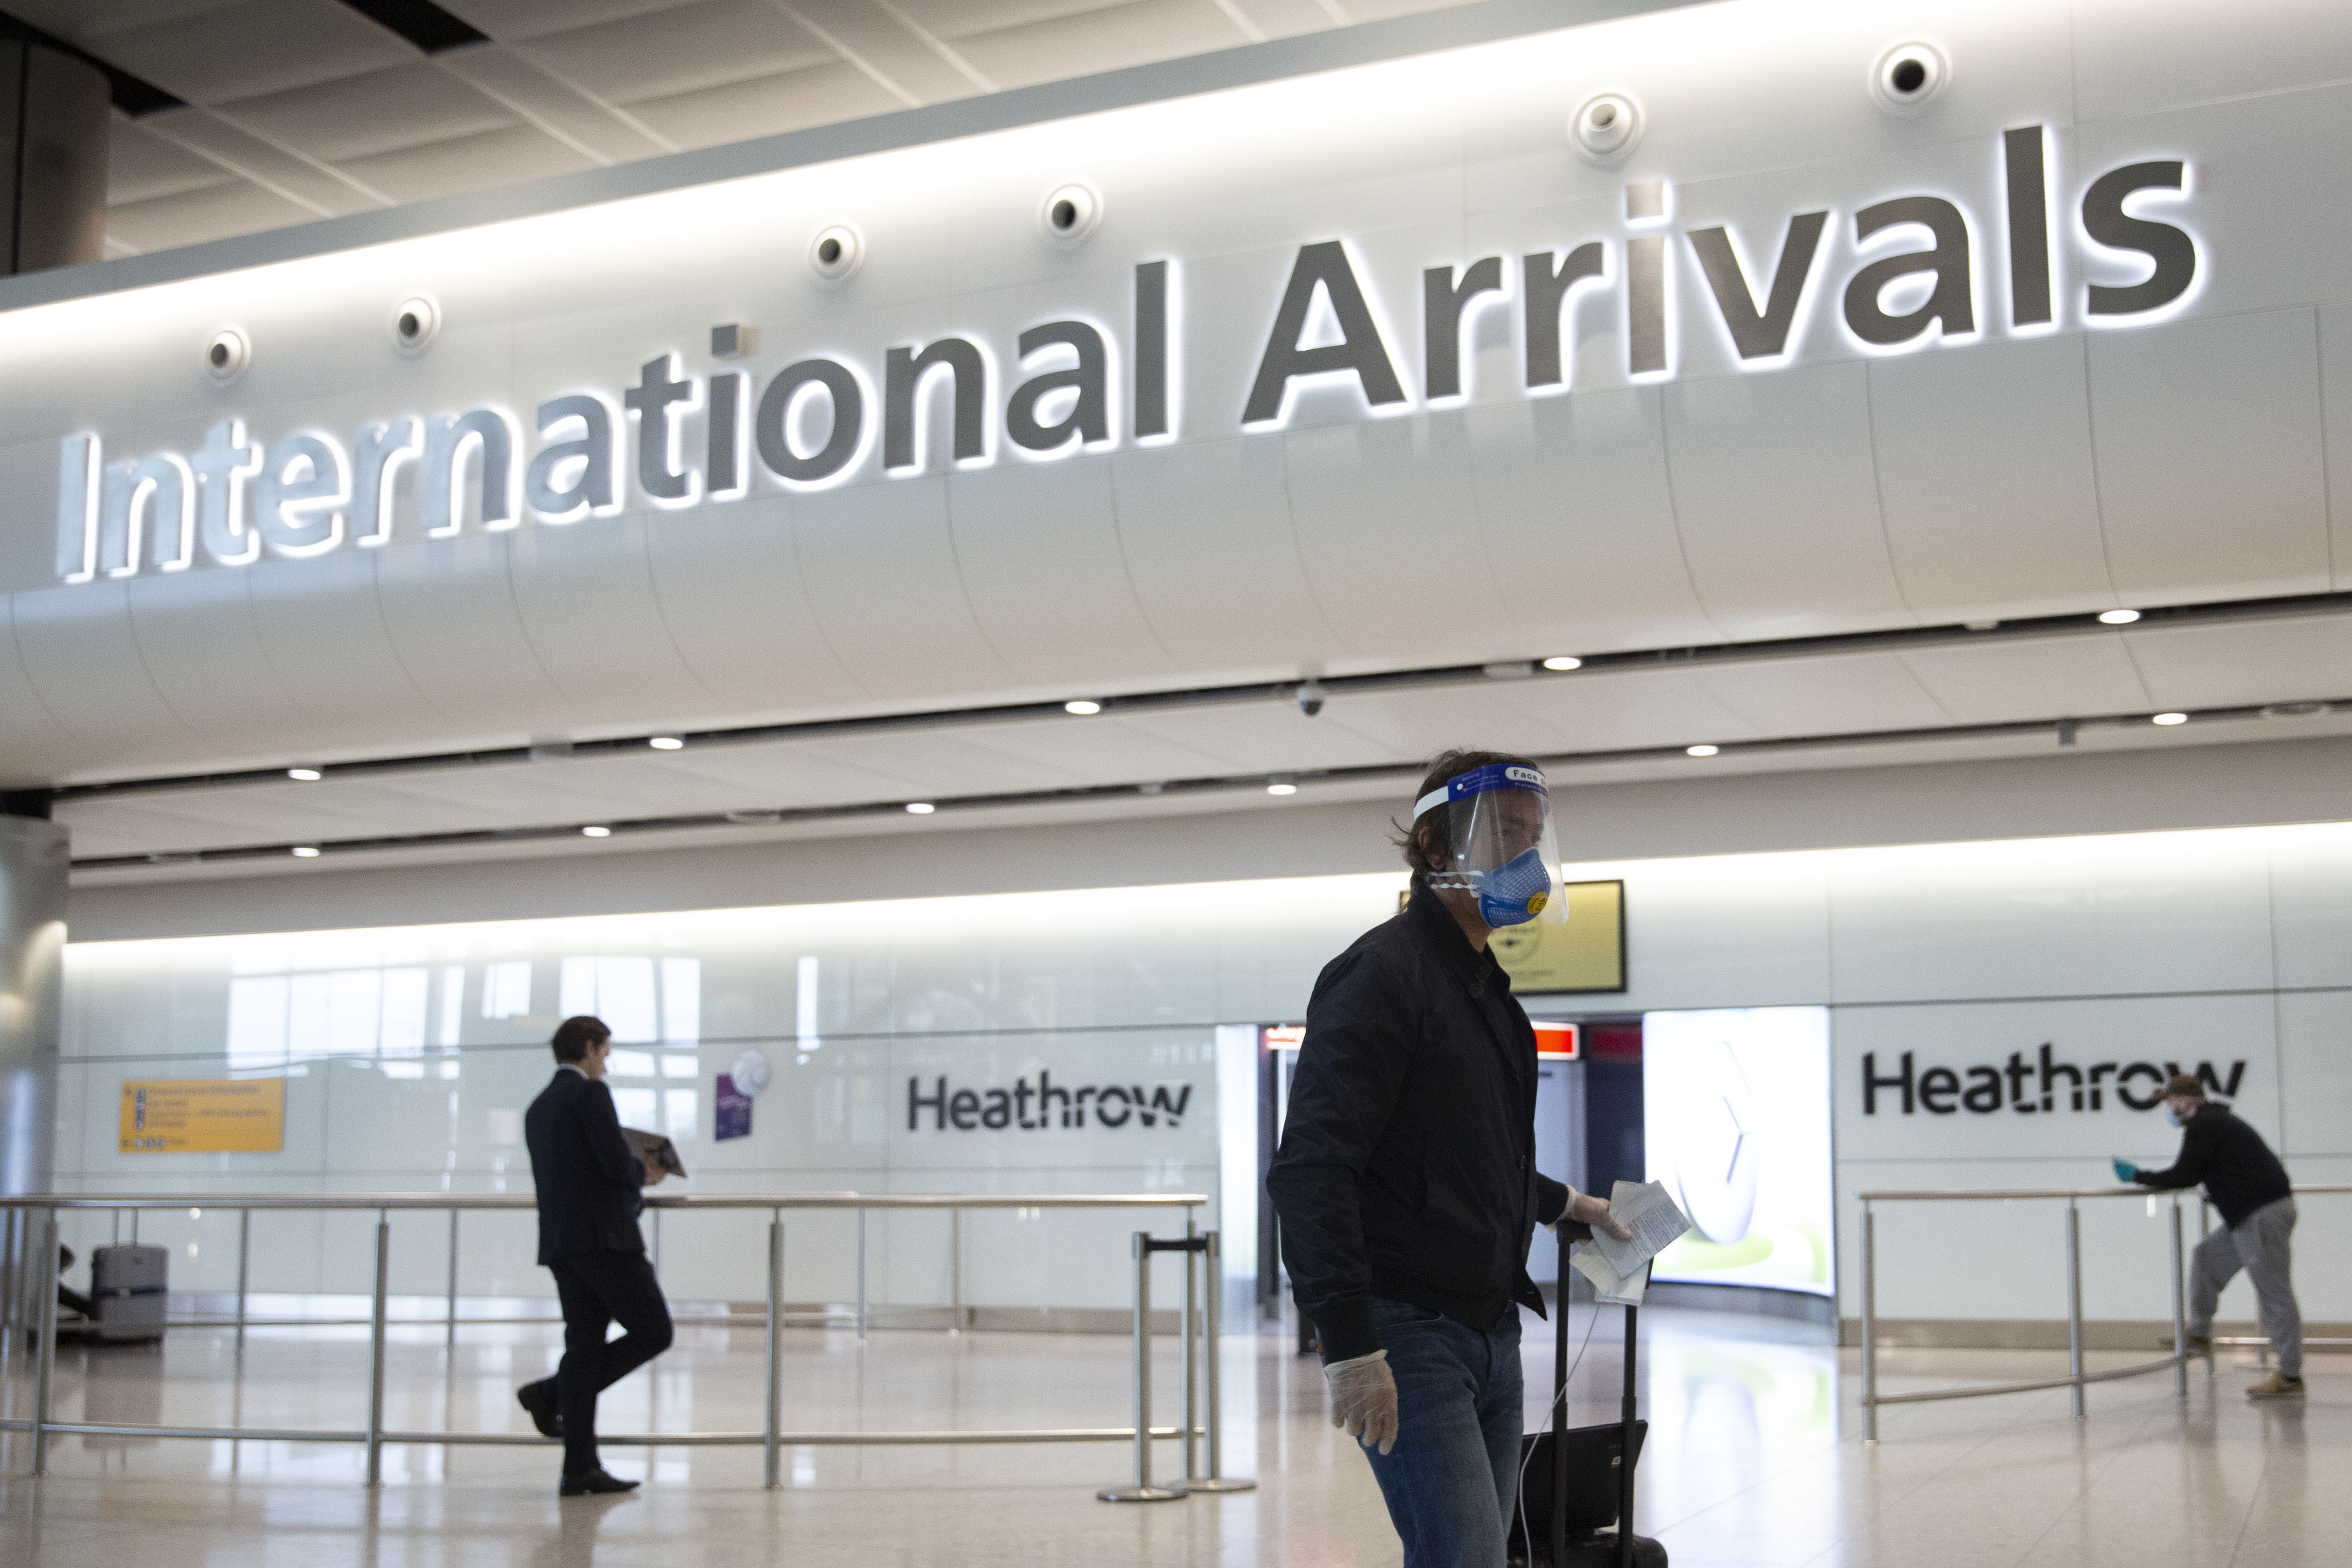 A passenger wearing a face shield and face mask arrives on the first day of new rules that people arriving in Britain from overseas will have to quarantine themselves for 14 days to help stop the spread of coronavirus, at Heathrow Airport in London, Monday, June 8, 2020. The British government has said that anyone caught not complying with the quarantine will face a fine. (AP Photo/Matt Dunham)